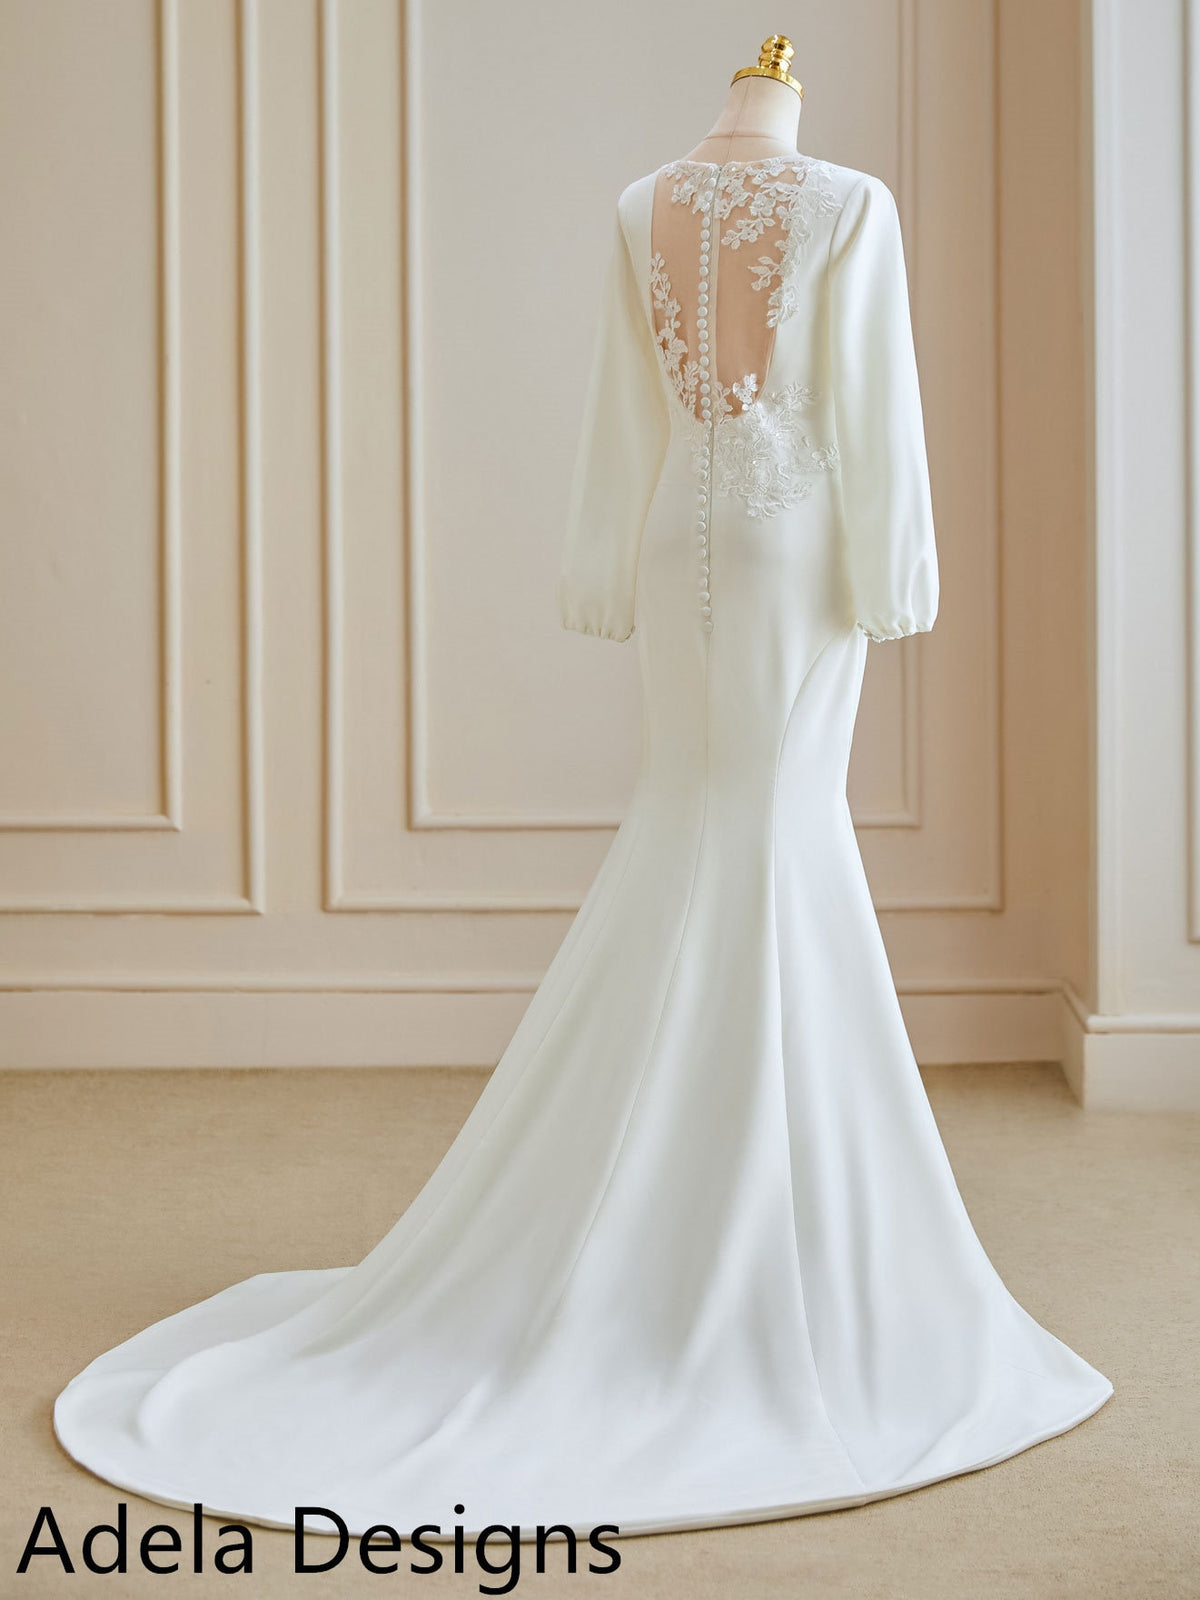 Crepe Fit And Flare Long Bishop Sleeves Simple Bridal Gown Wedding Dress Lace Back Buttons Plus Size Sexy Neckline Minimalist